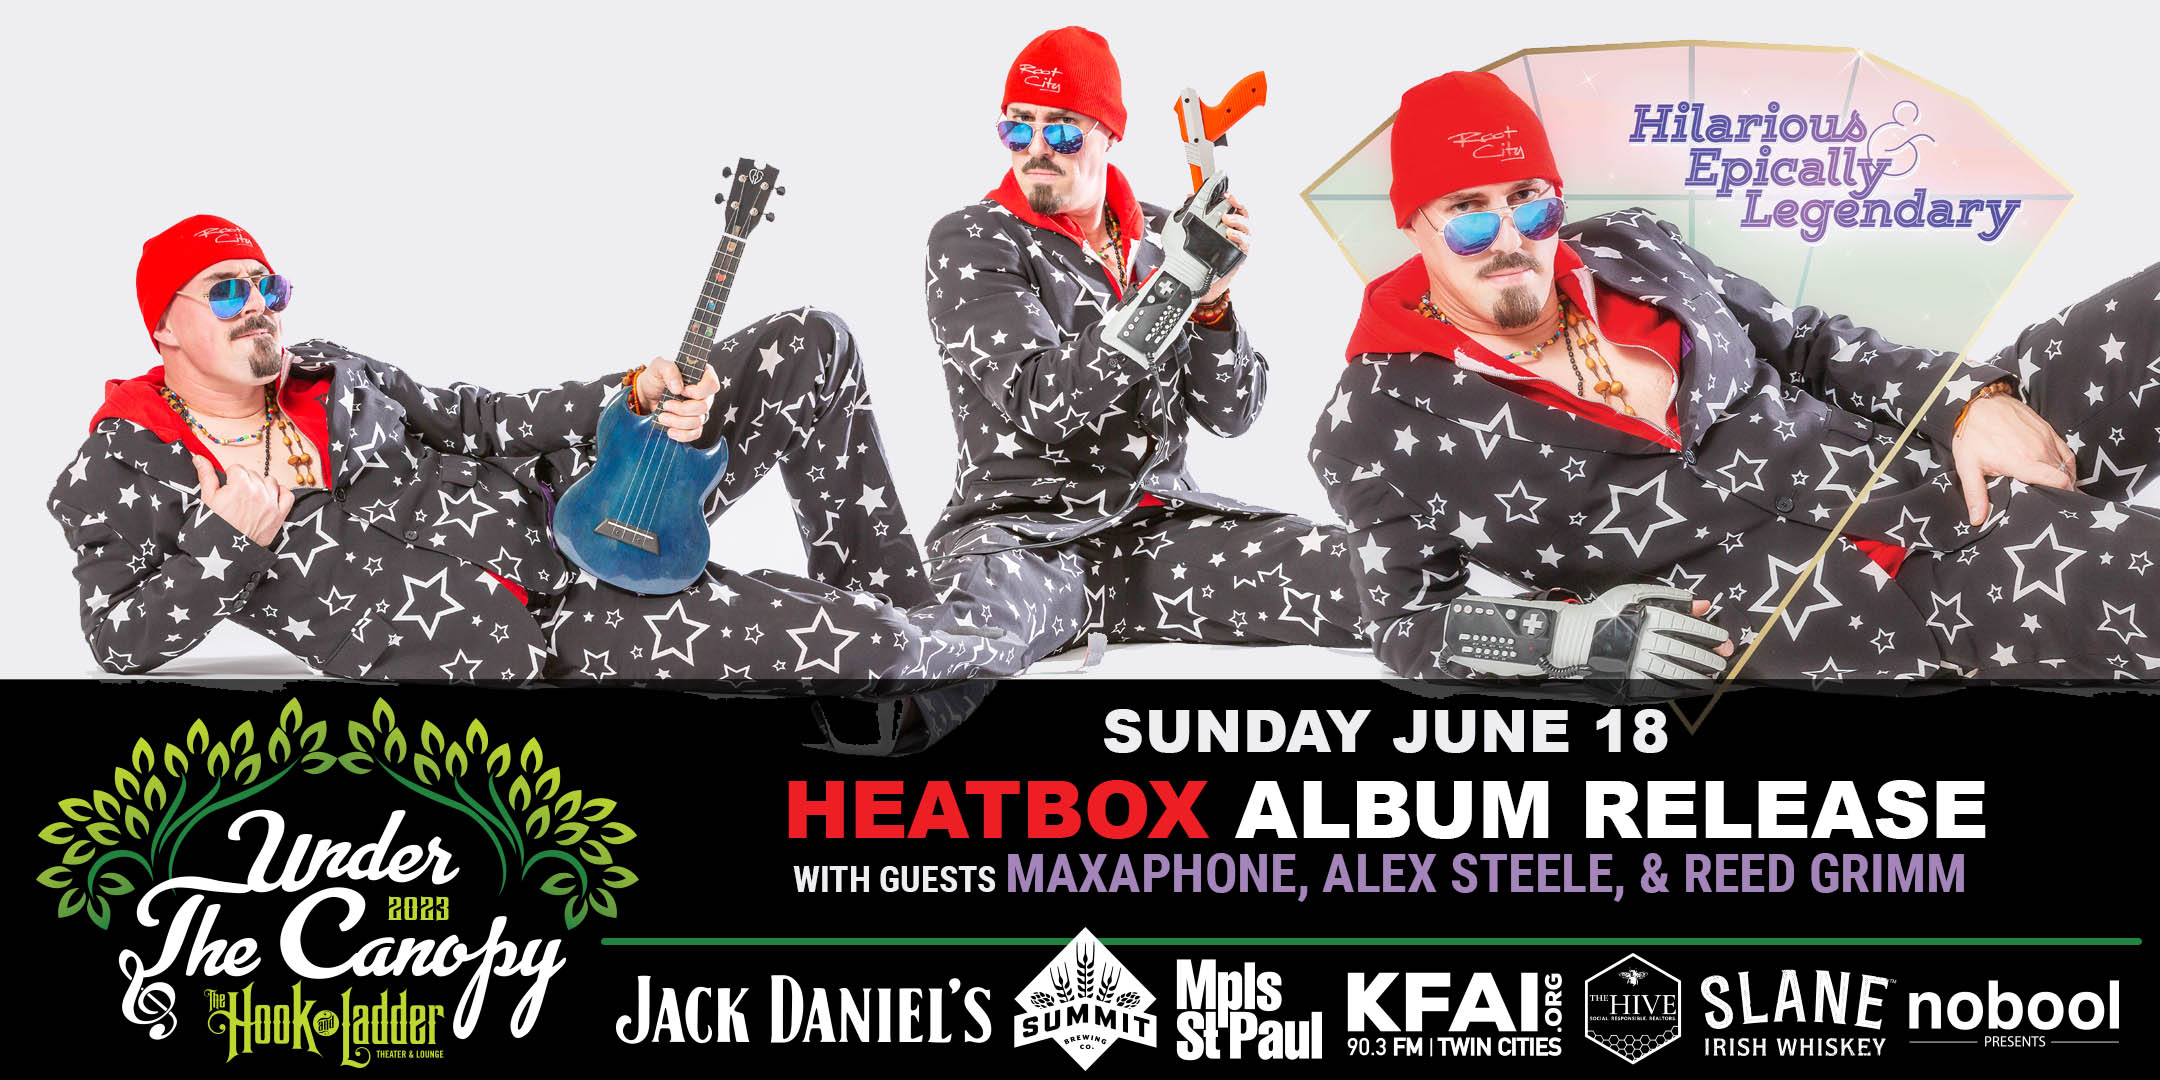 HEATBOX 'Hilarious & Epically Legendary' Album Release with special guests Maxaphone, Alex Steele, & Reed Grimm Sunday, June 18 Under The Canopy at The Hook and Ladder Theater "An Urban Outdoor Summer Concert Series" Doors 4:00pm :: Music 5:00pm :: Family friendly. Under 21 with Parent or Guardian Reserved Seats: $30 GA: $15 ADV / $20 DOS